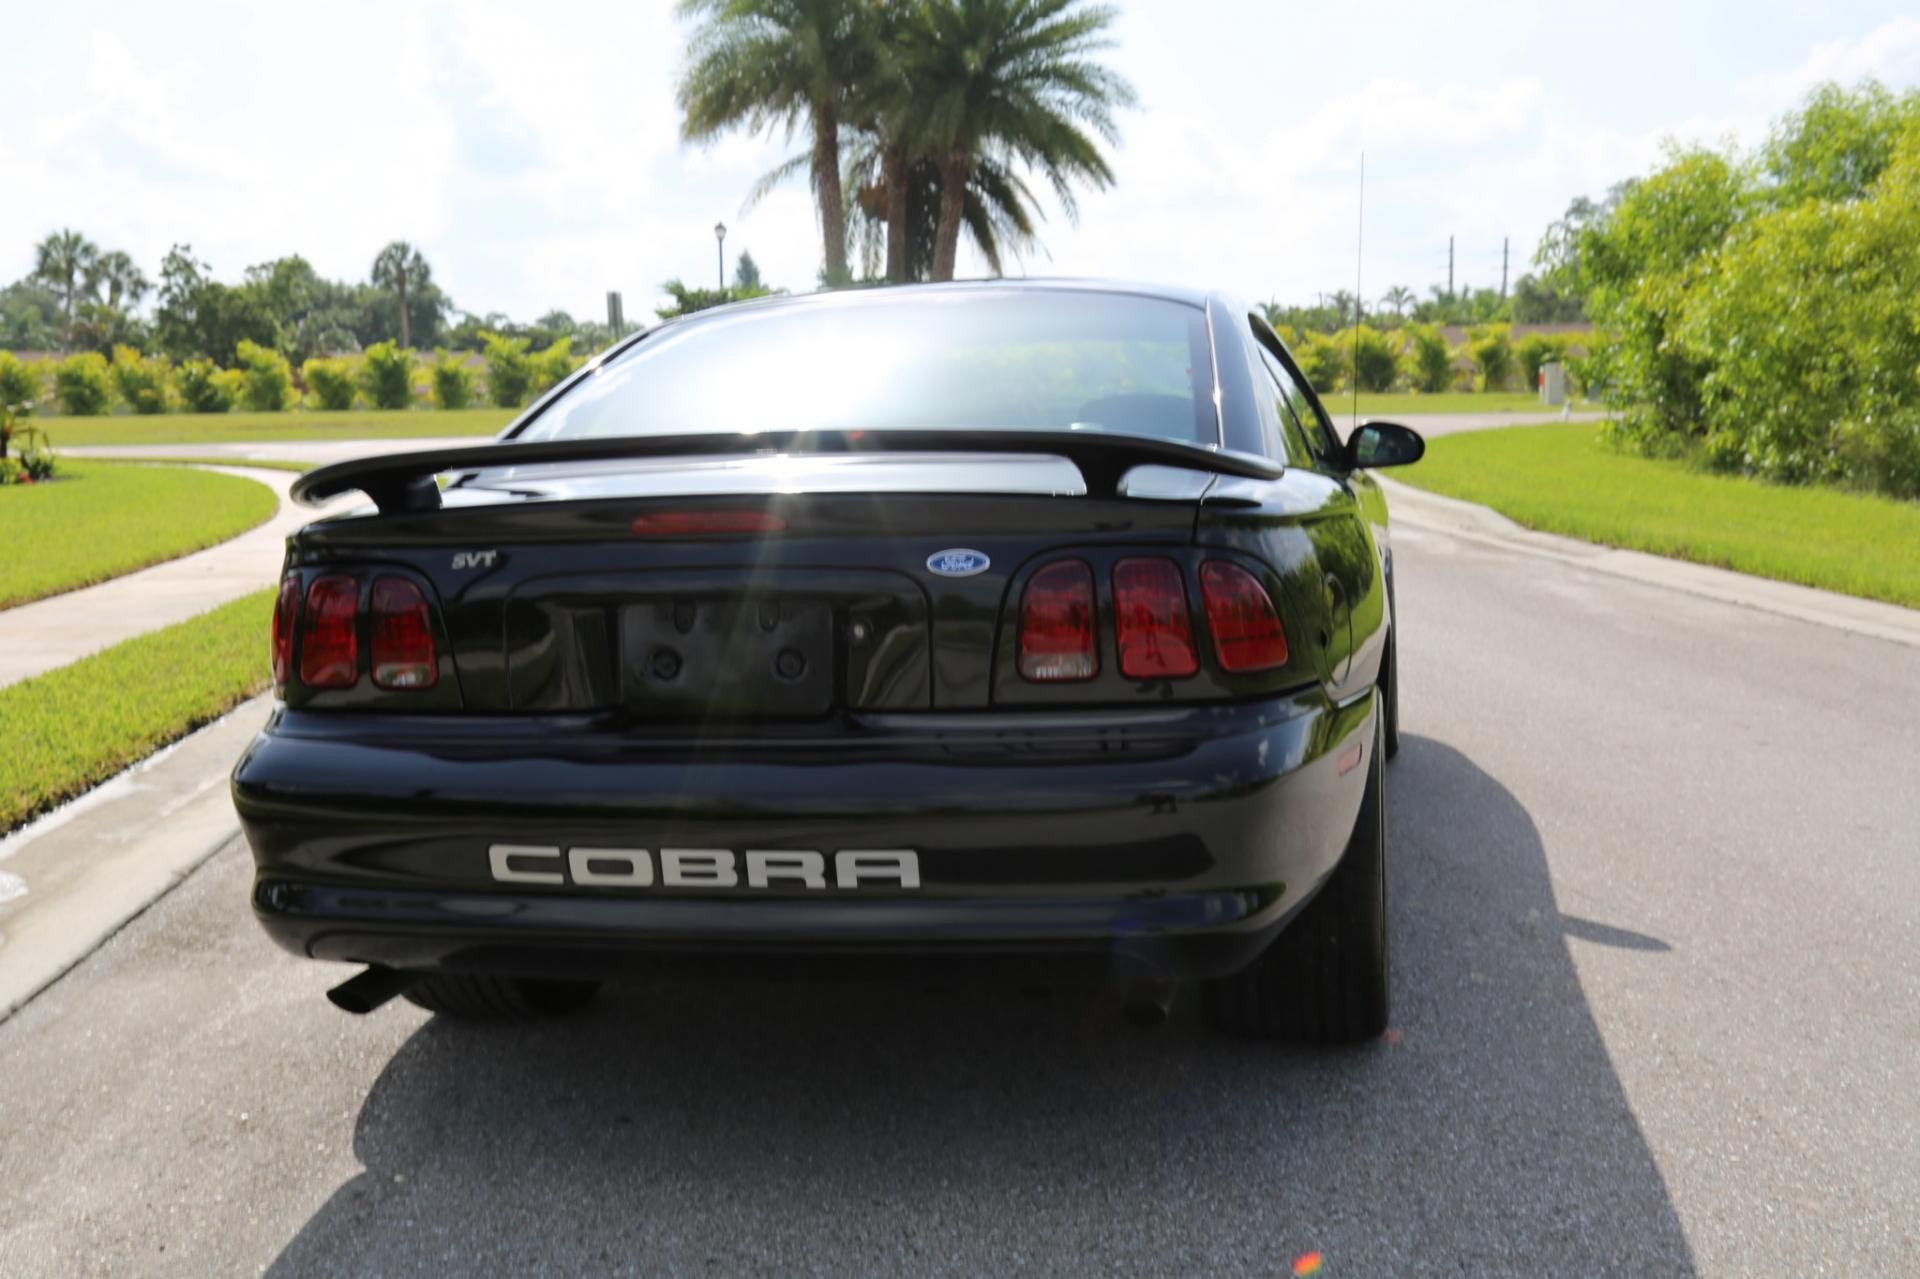 Used 1996 Mustang Cobra SVT Cobra for sale Sold at Muscle Cars for Sale Inc. in Fort Myers FL 33912 4